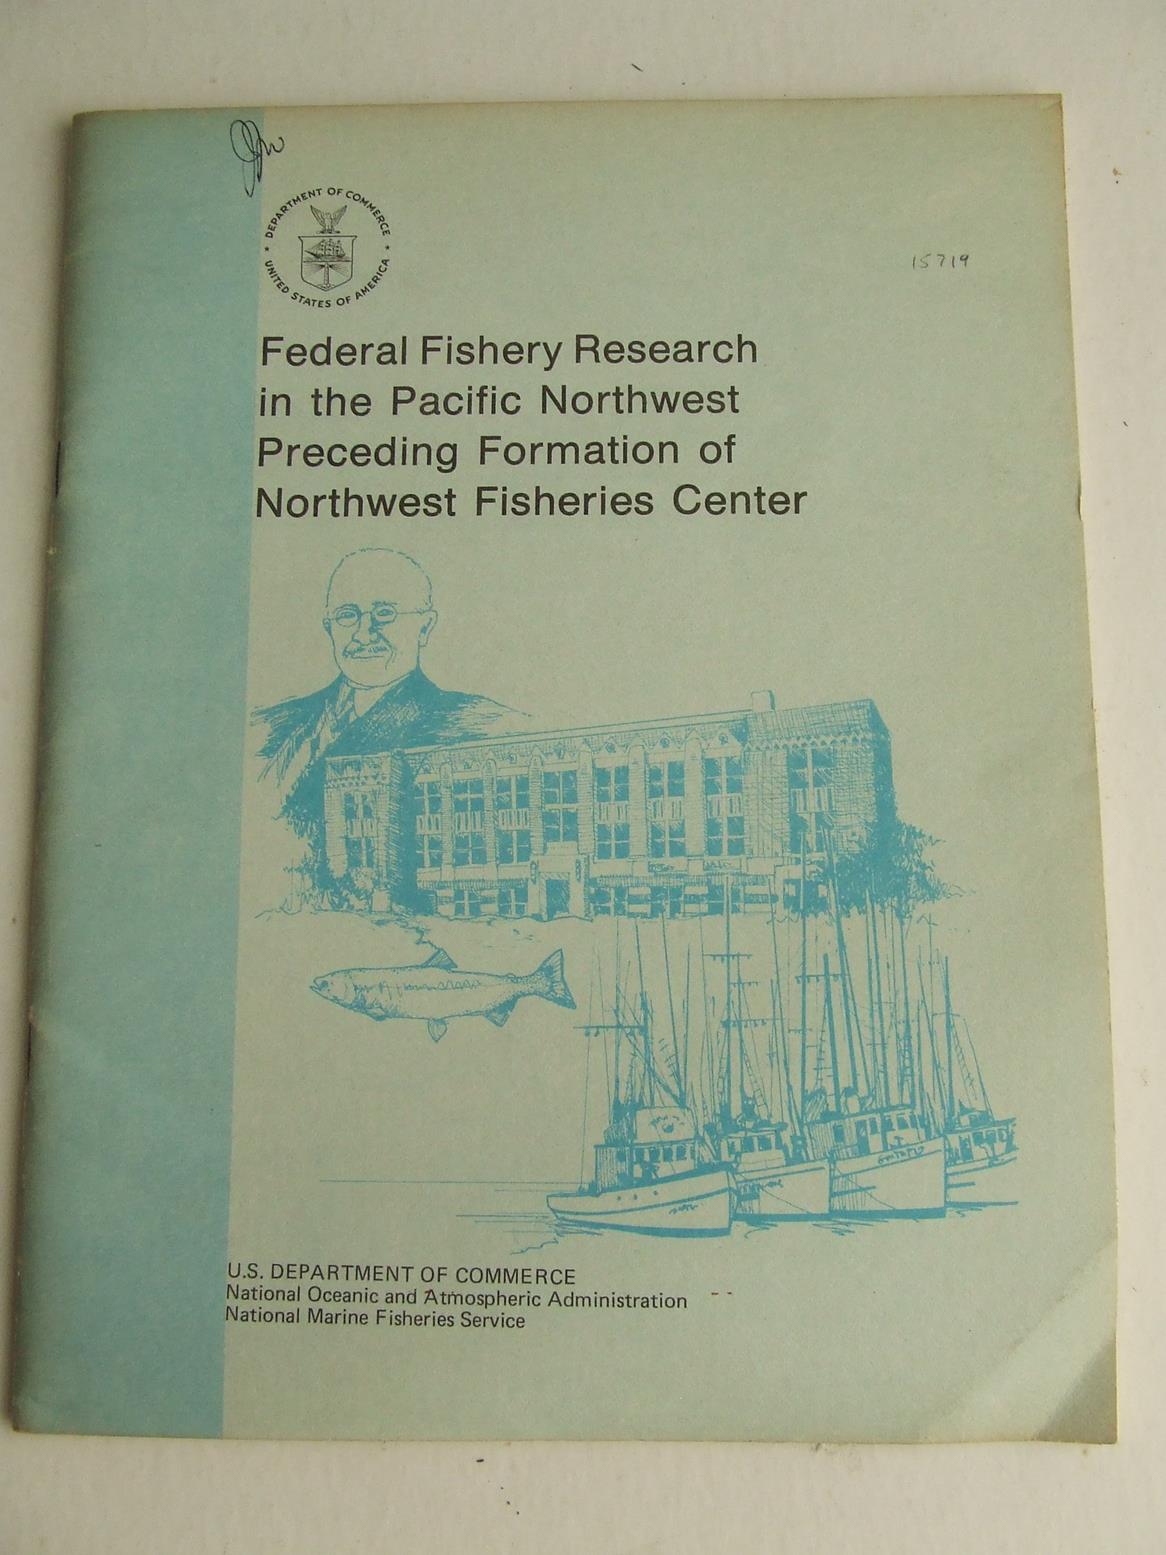 FEDERAL FISHERY RESEARCH IN THE PACIFIC NORTHWEST